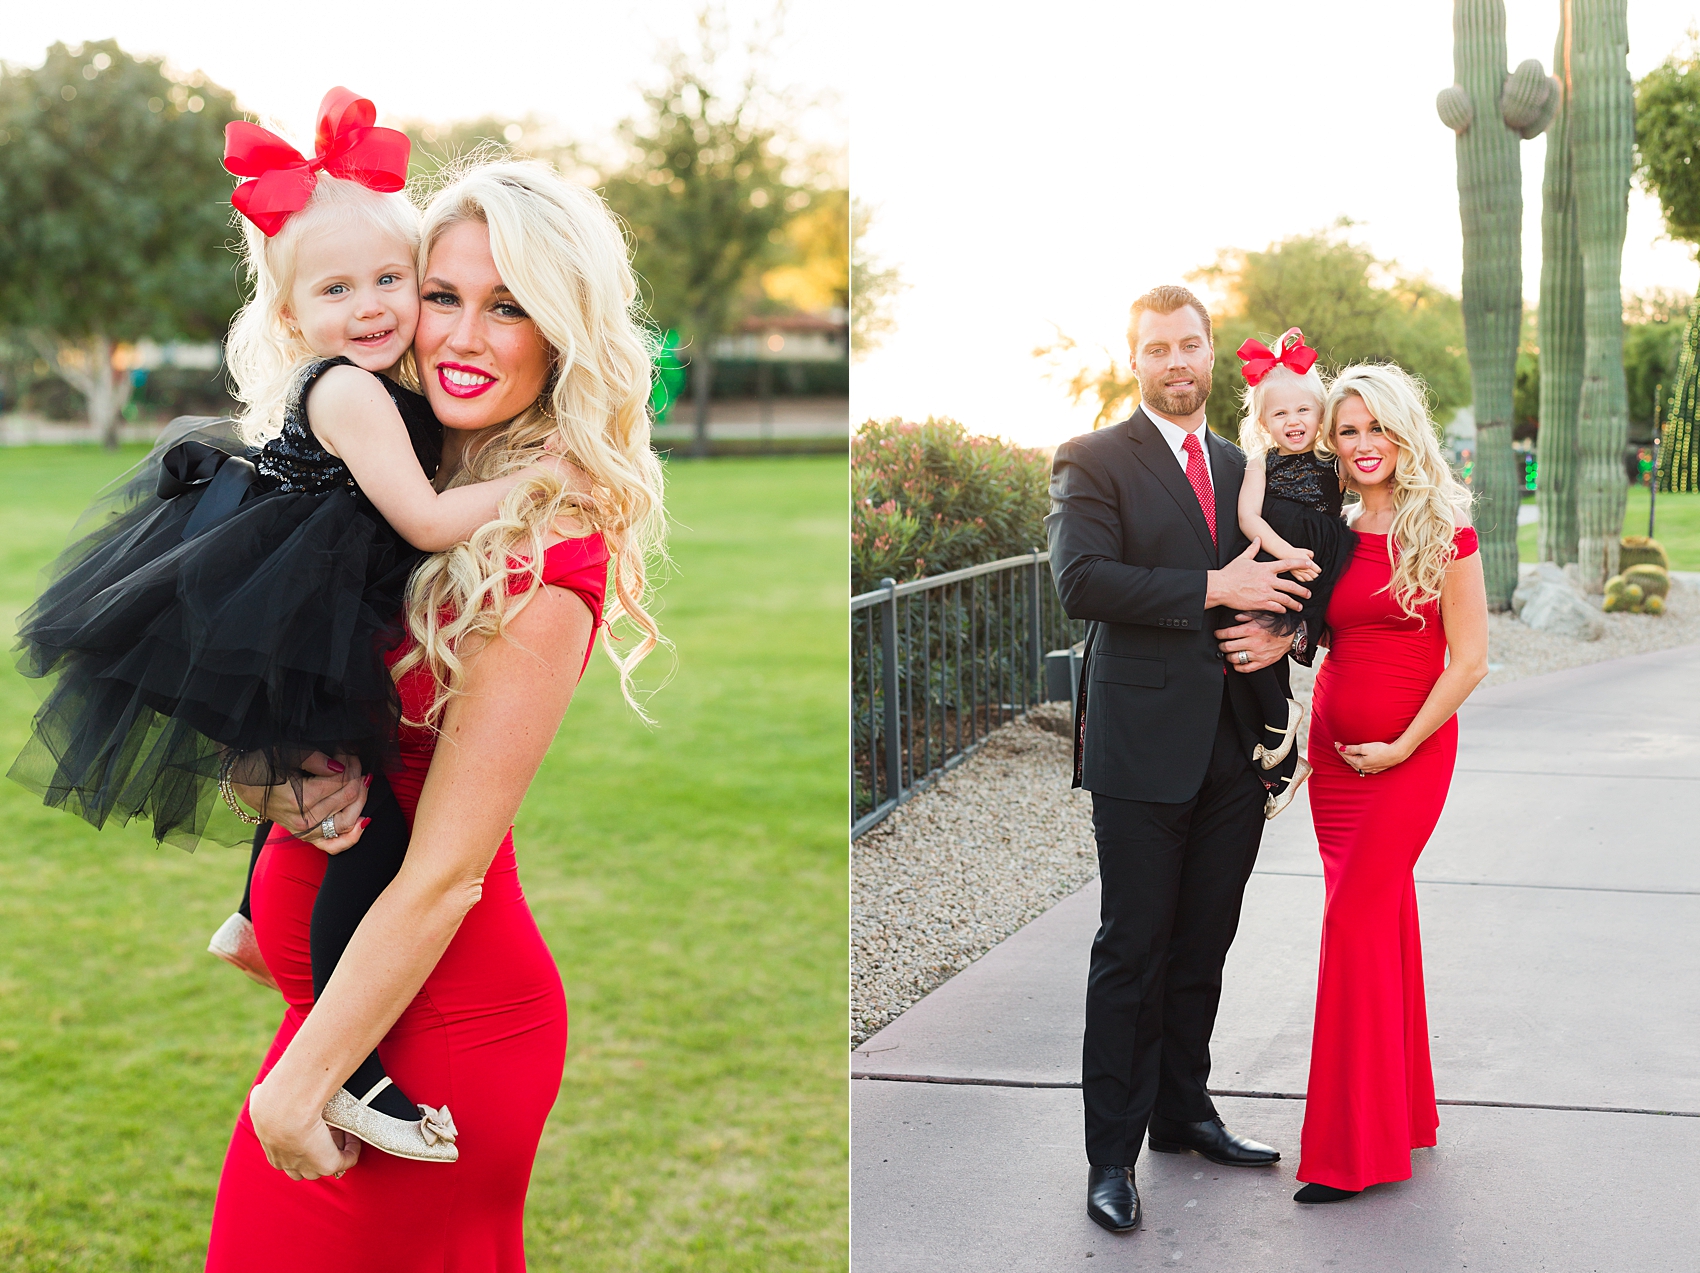 Leah Hope Photography | Scottsdale Phoenix Arizona | Fairmont Princess Resort | Family Pictures | Maternity Photos | Baby Announcement | Elegant Classy Upscale Style | What to Wear | Family Pregnancy Poses